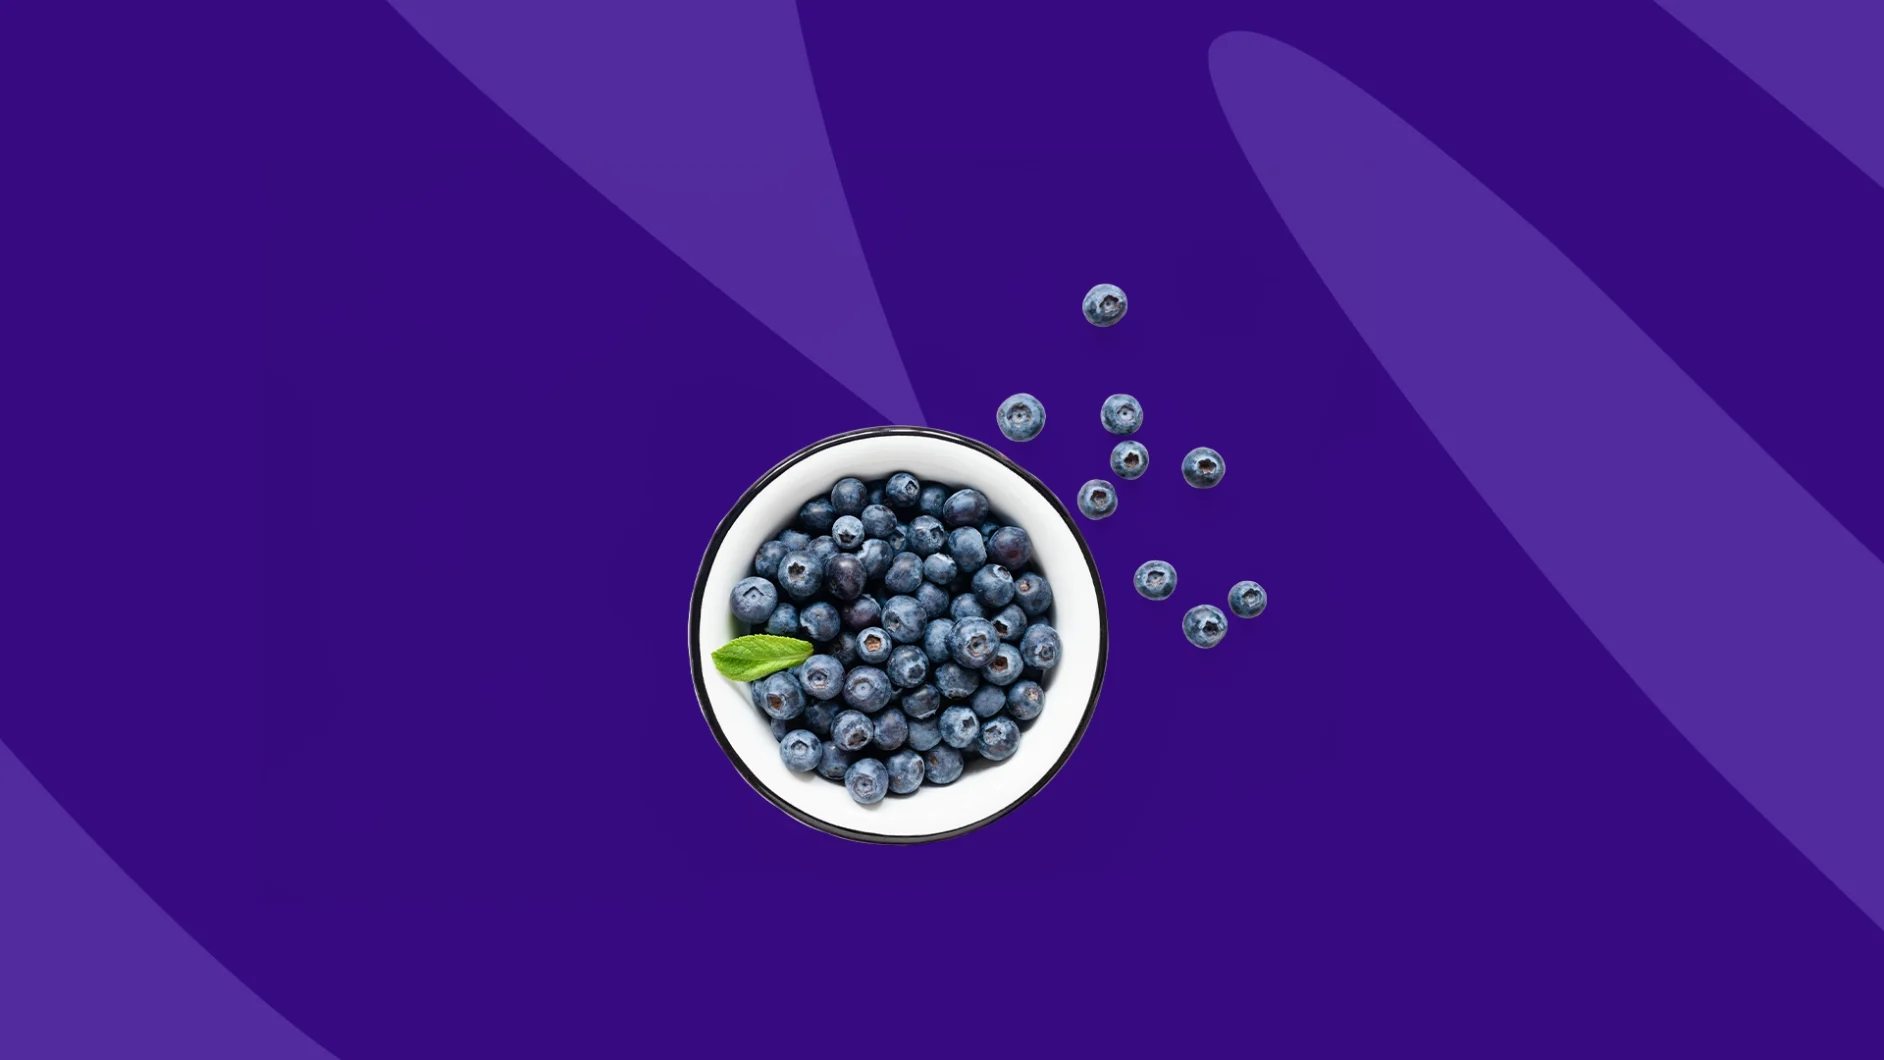 A bowl of blueberries to depict the health benefits of blueberries